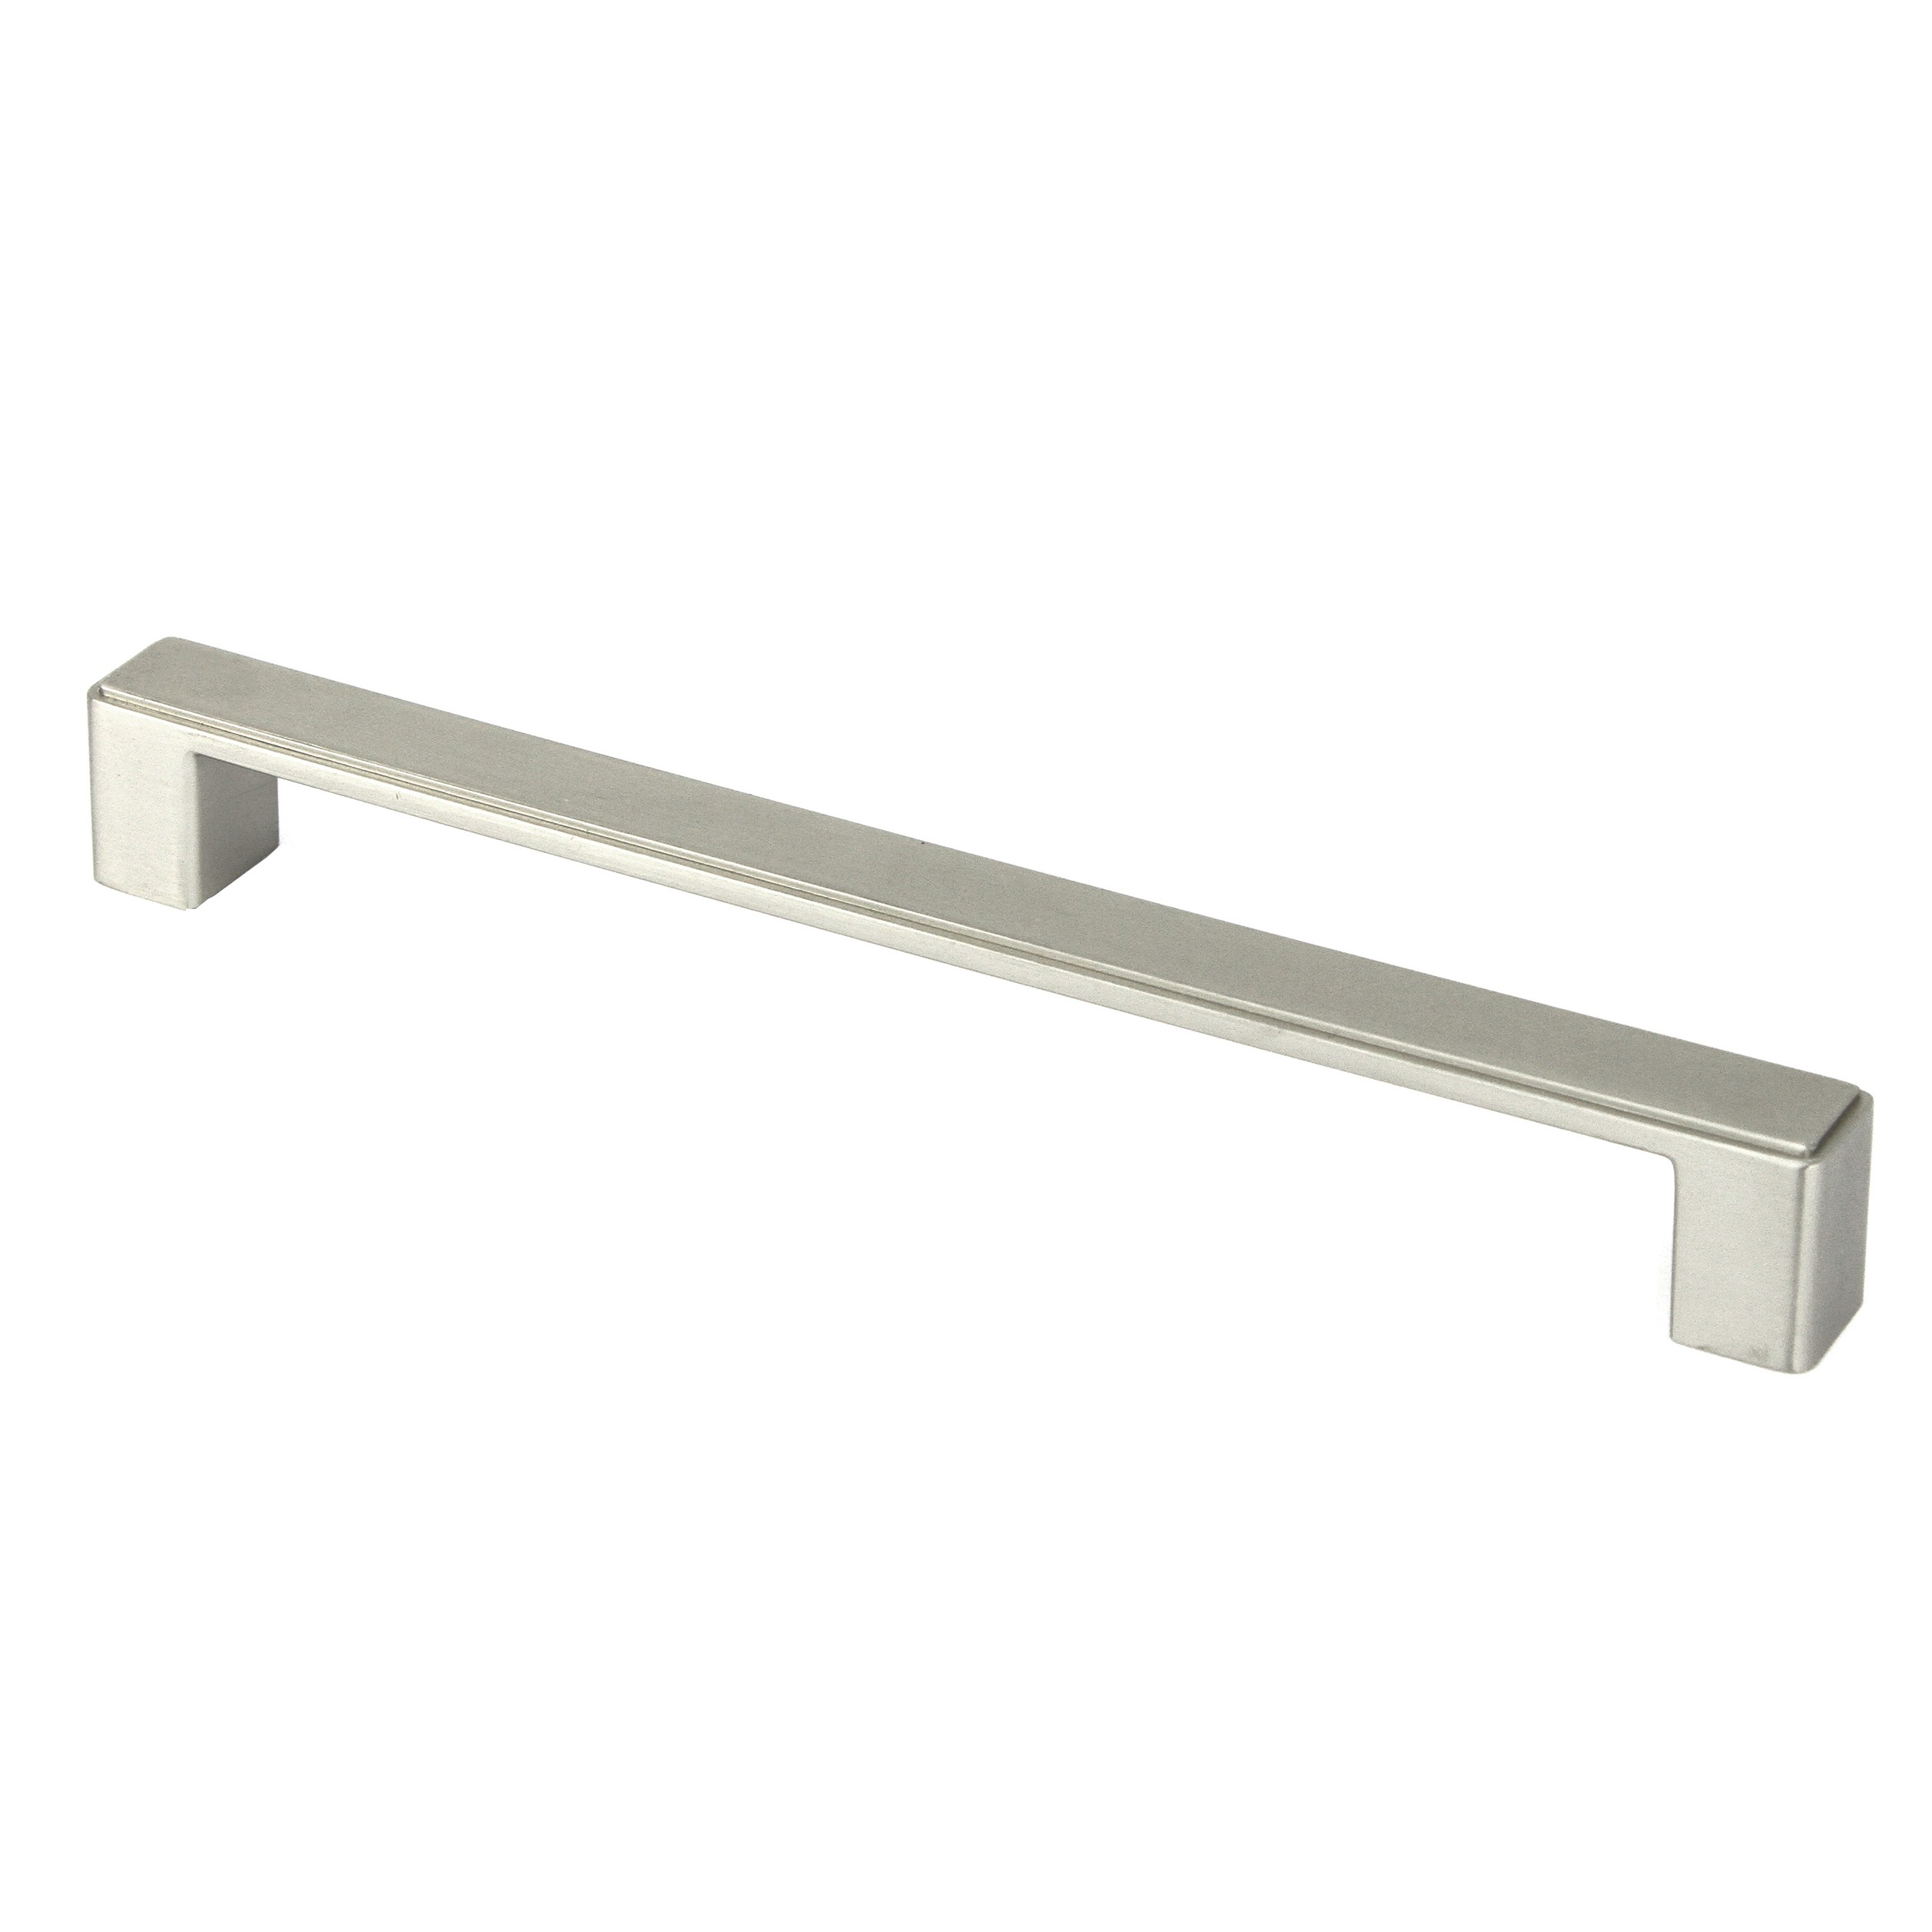 Stainless Steel Cabinet Handle Pull Knob In Brushed Nickel Finish